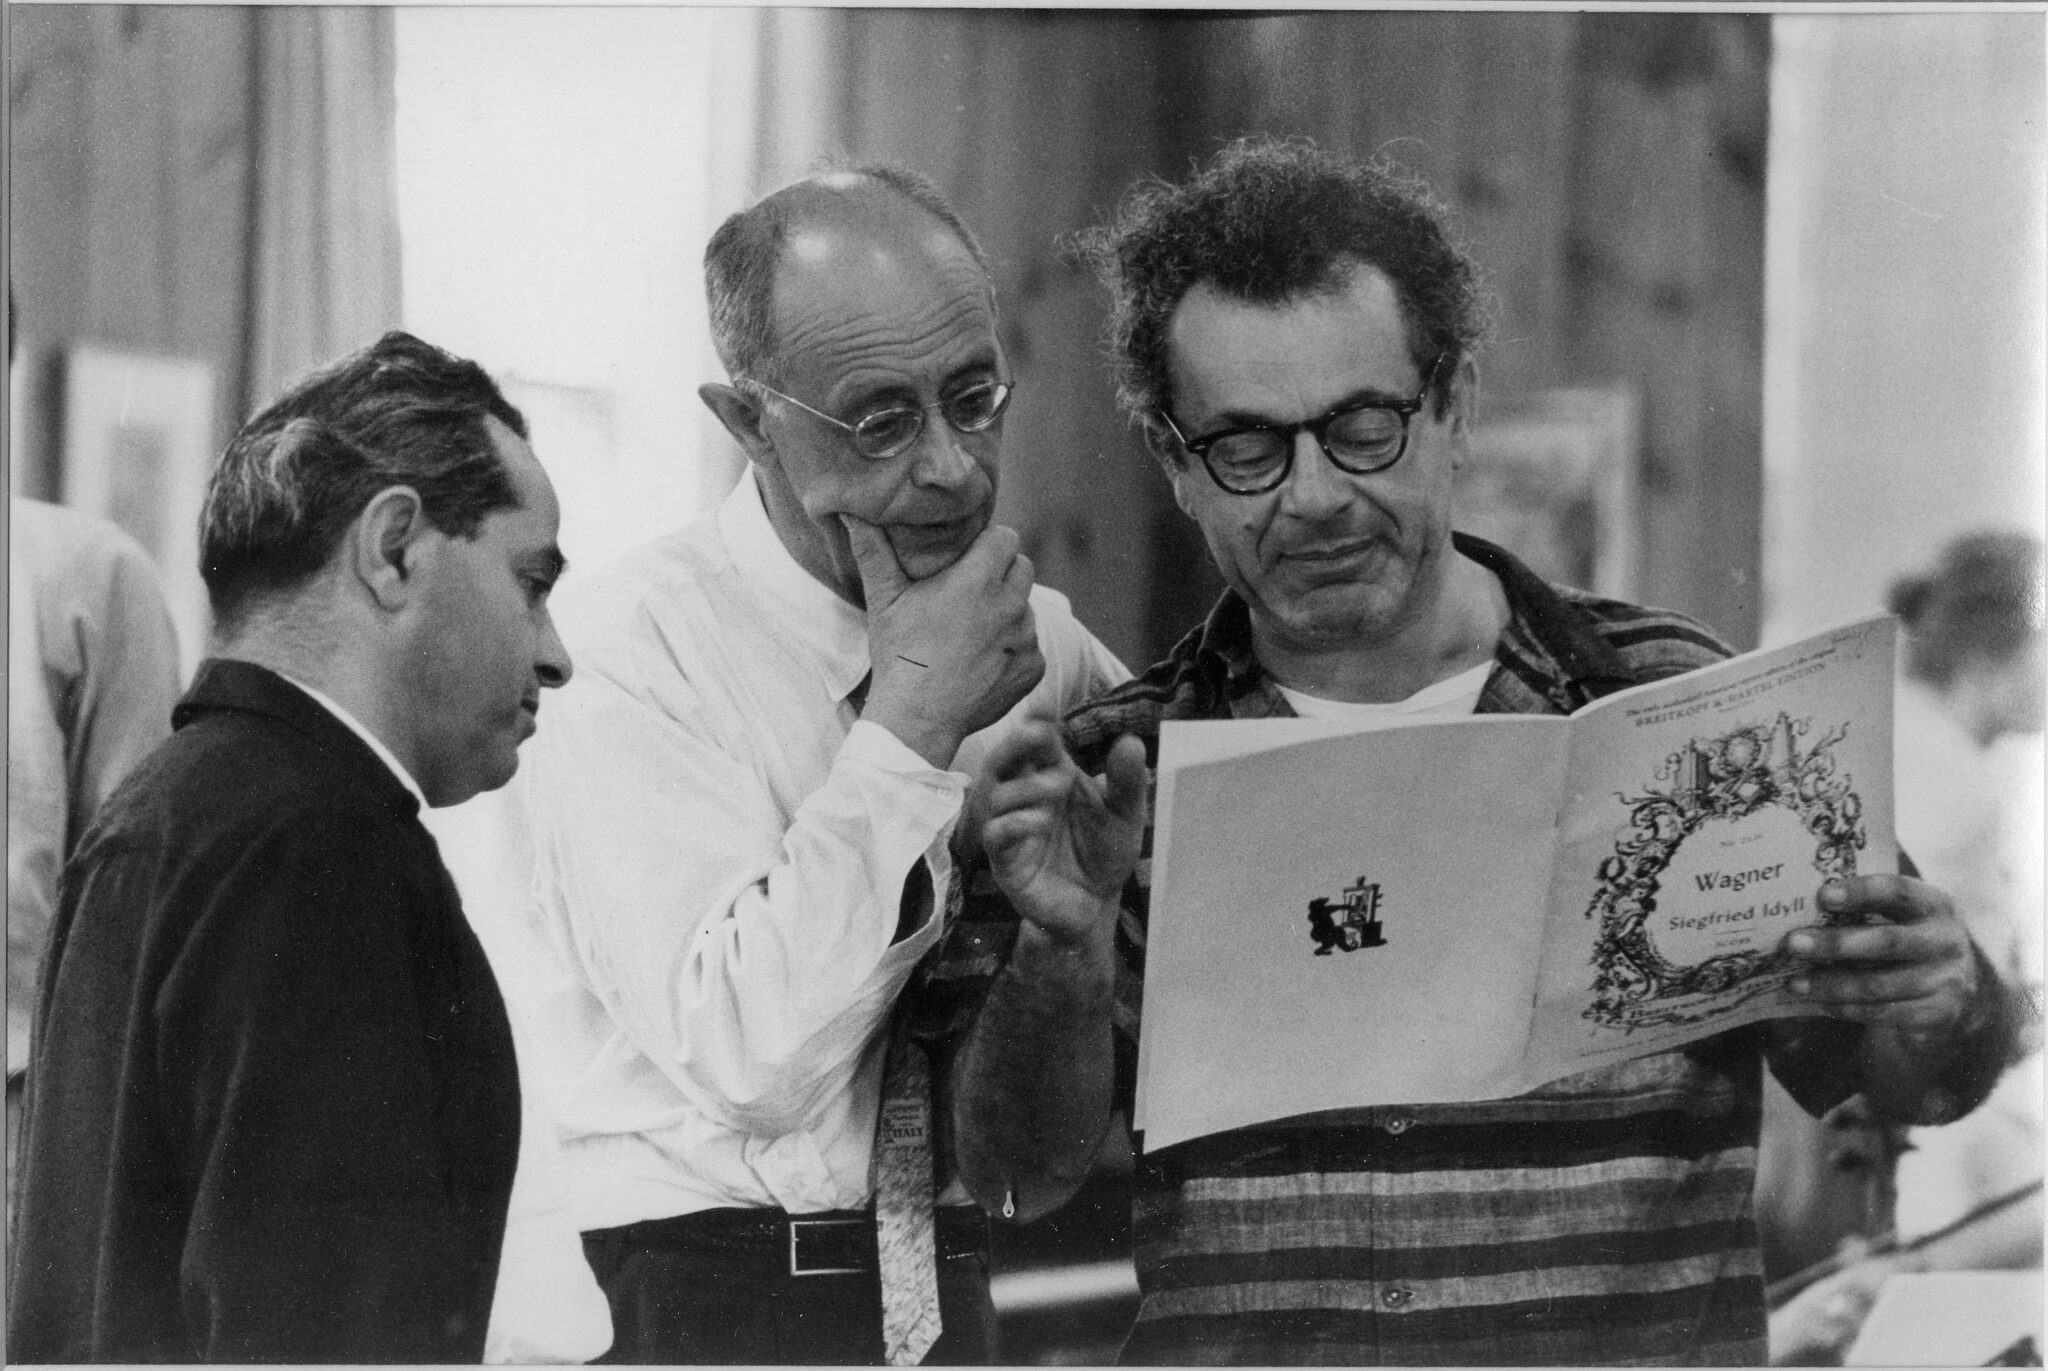 Felix Galimir, Rudolf Serkin, and Alexander Schneider | “There were all these great musicians at Marlboro who refused to be boxed. They refused categorization. Moyse was one of them, Mischa Schneider, Alexander Schneider, people who were great musical personalities, profound thinkers, profound performers, they extended over the boundaries of playing in an orchestra, playing chamber music, playing as a soloist, conducting. So many of them did so many different things. And so as a youngster going to a place like that, it made a huge impression on me. Suddenly I had the sense that I had discovered something about music and I had discovered something about myself.” -Arnold Steinhardt